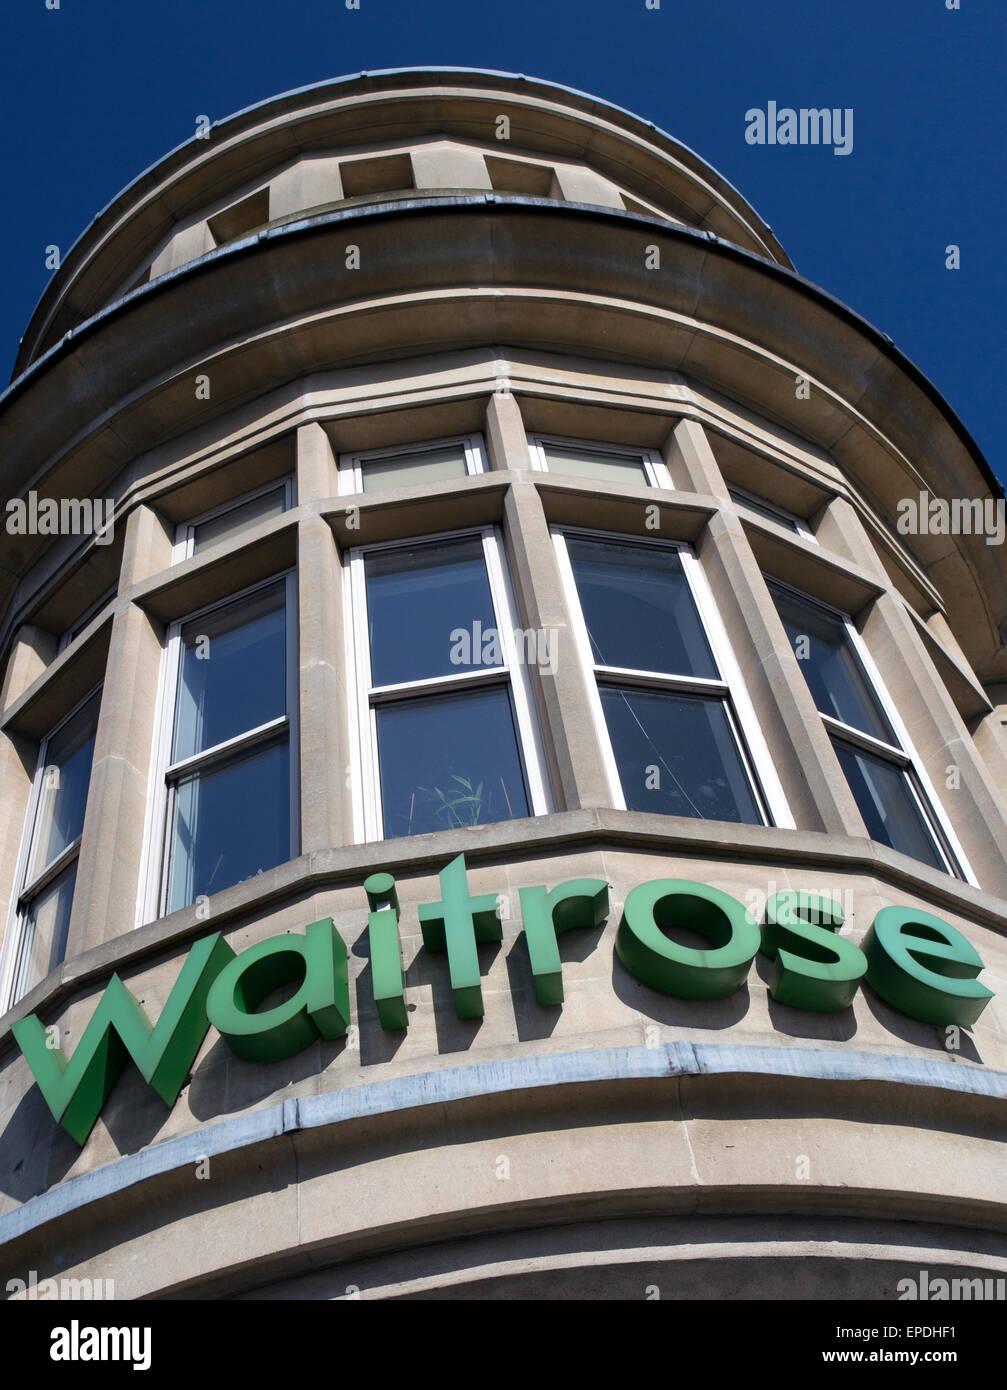 Branch of Waitrose supermarkets in Holloway Road, North London Stock Photo